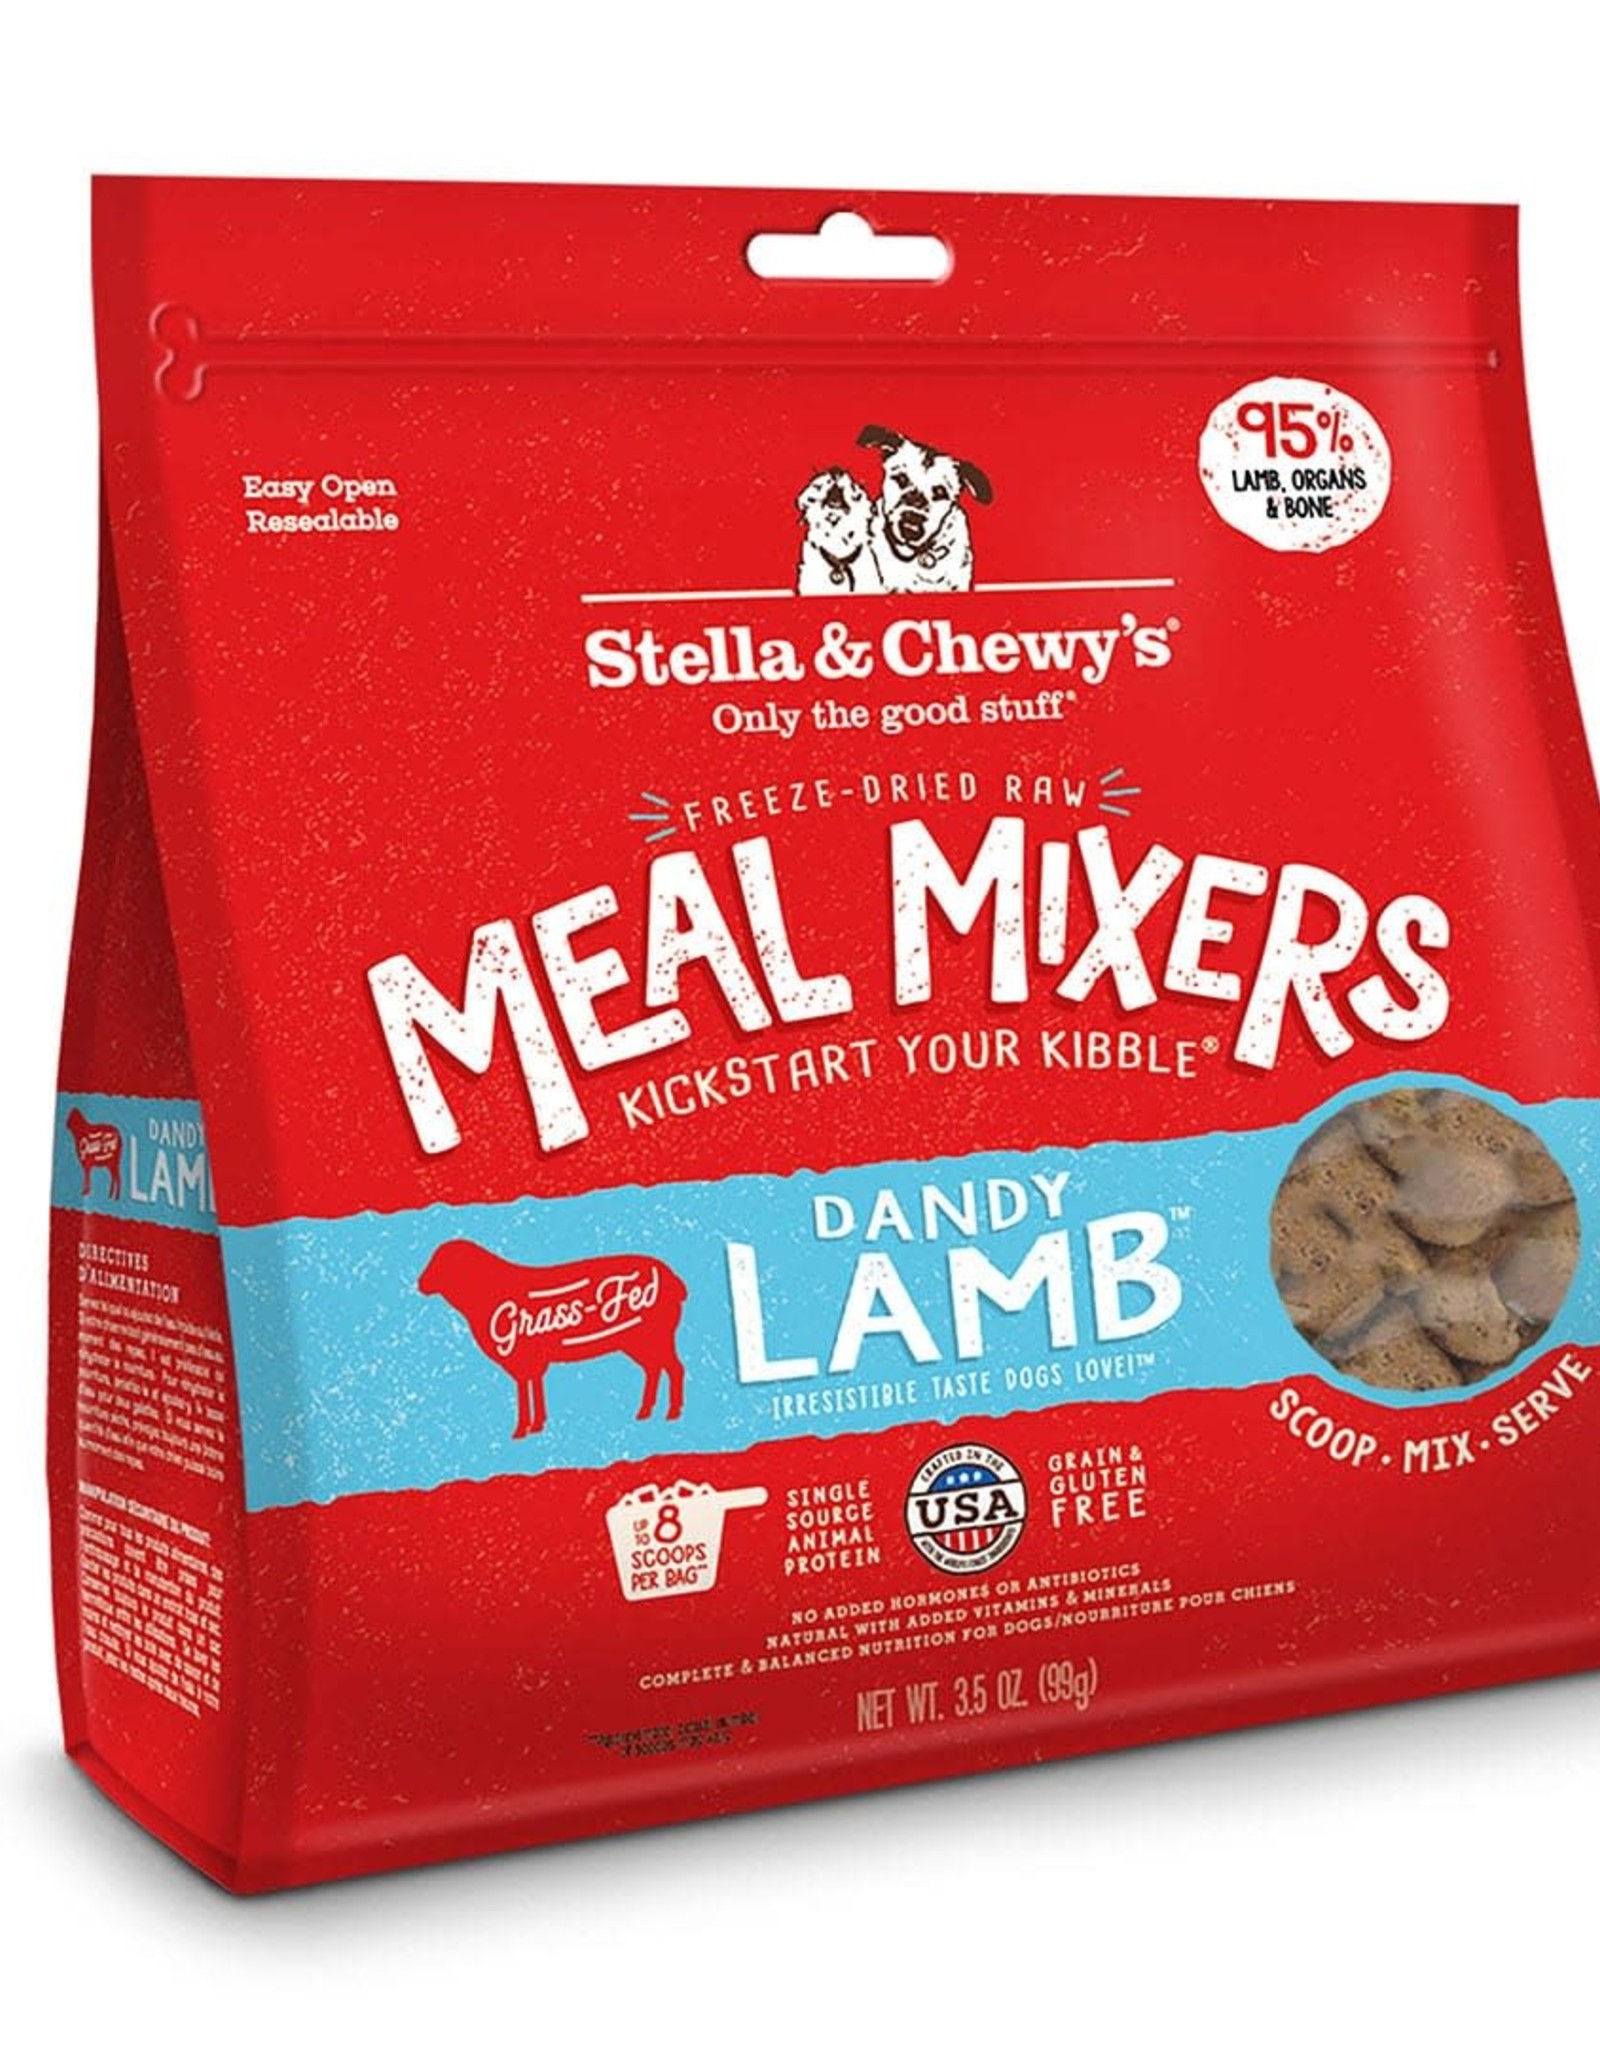 STELLA & CHEWY'S LLC STELLA & CHEWY'S FREEZE-DRIED CHEWY'S LAMB MEAL MIXERS 18OZ